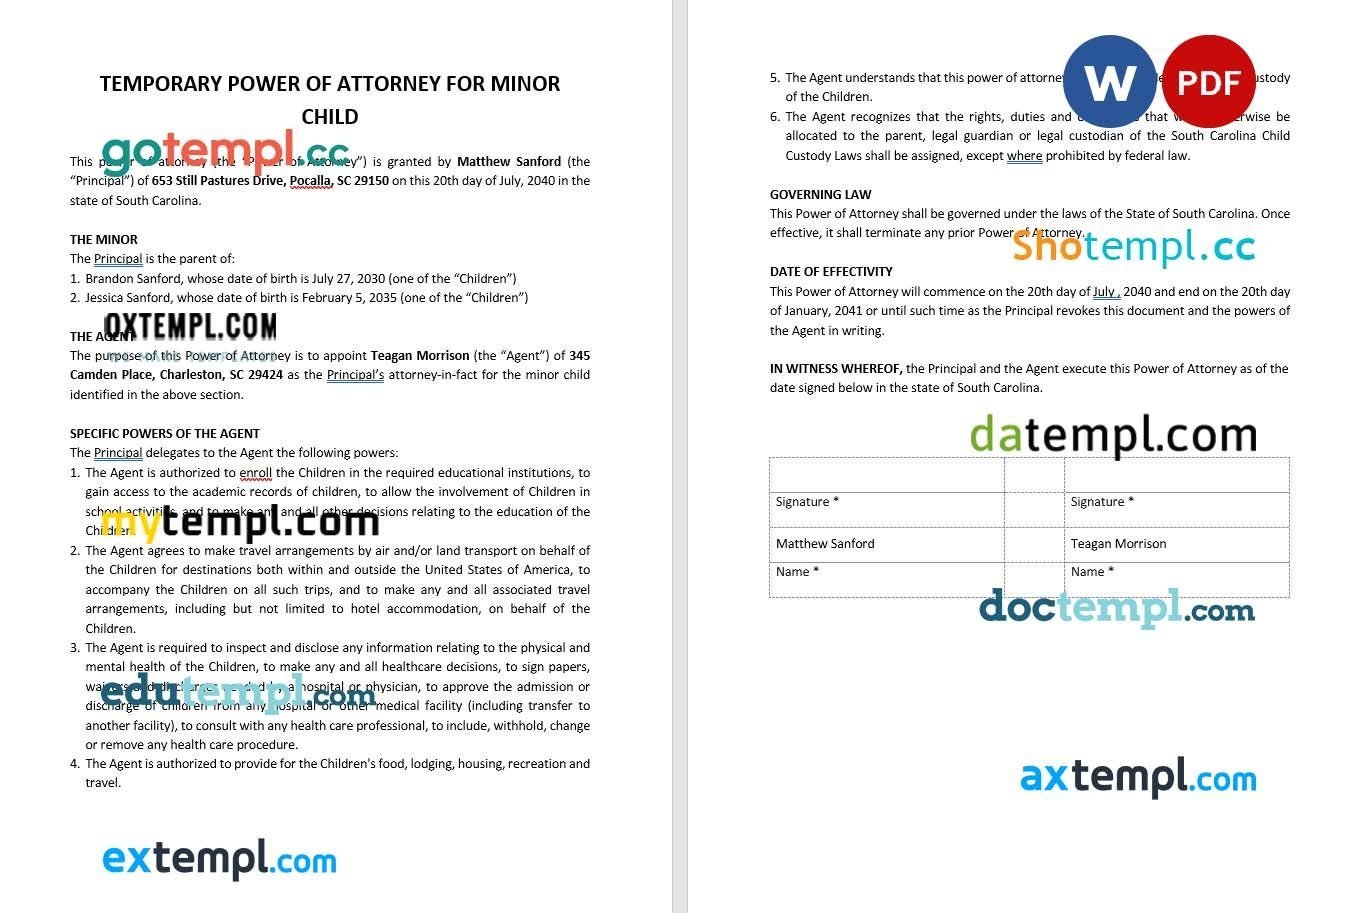 Temporary Power of Attorney for Minor Child example, fully editable